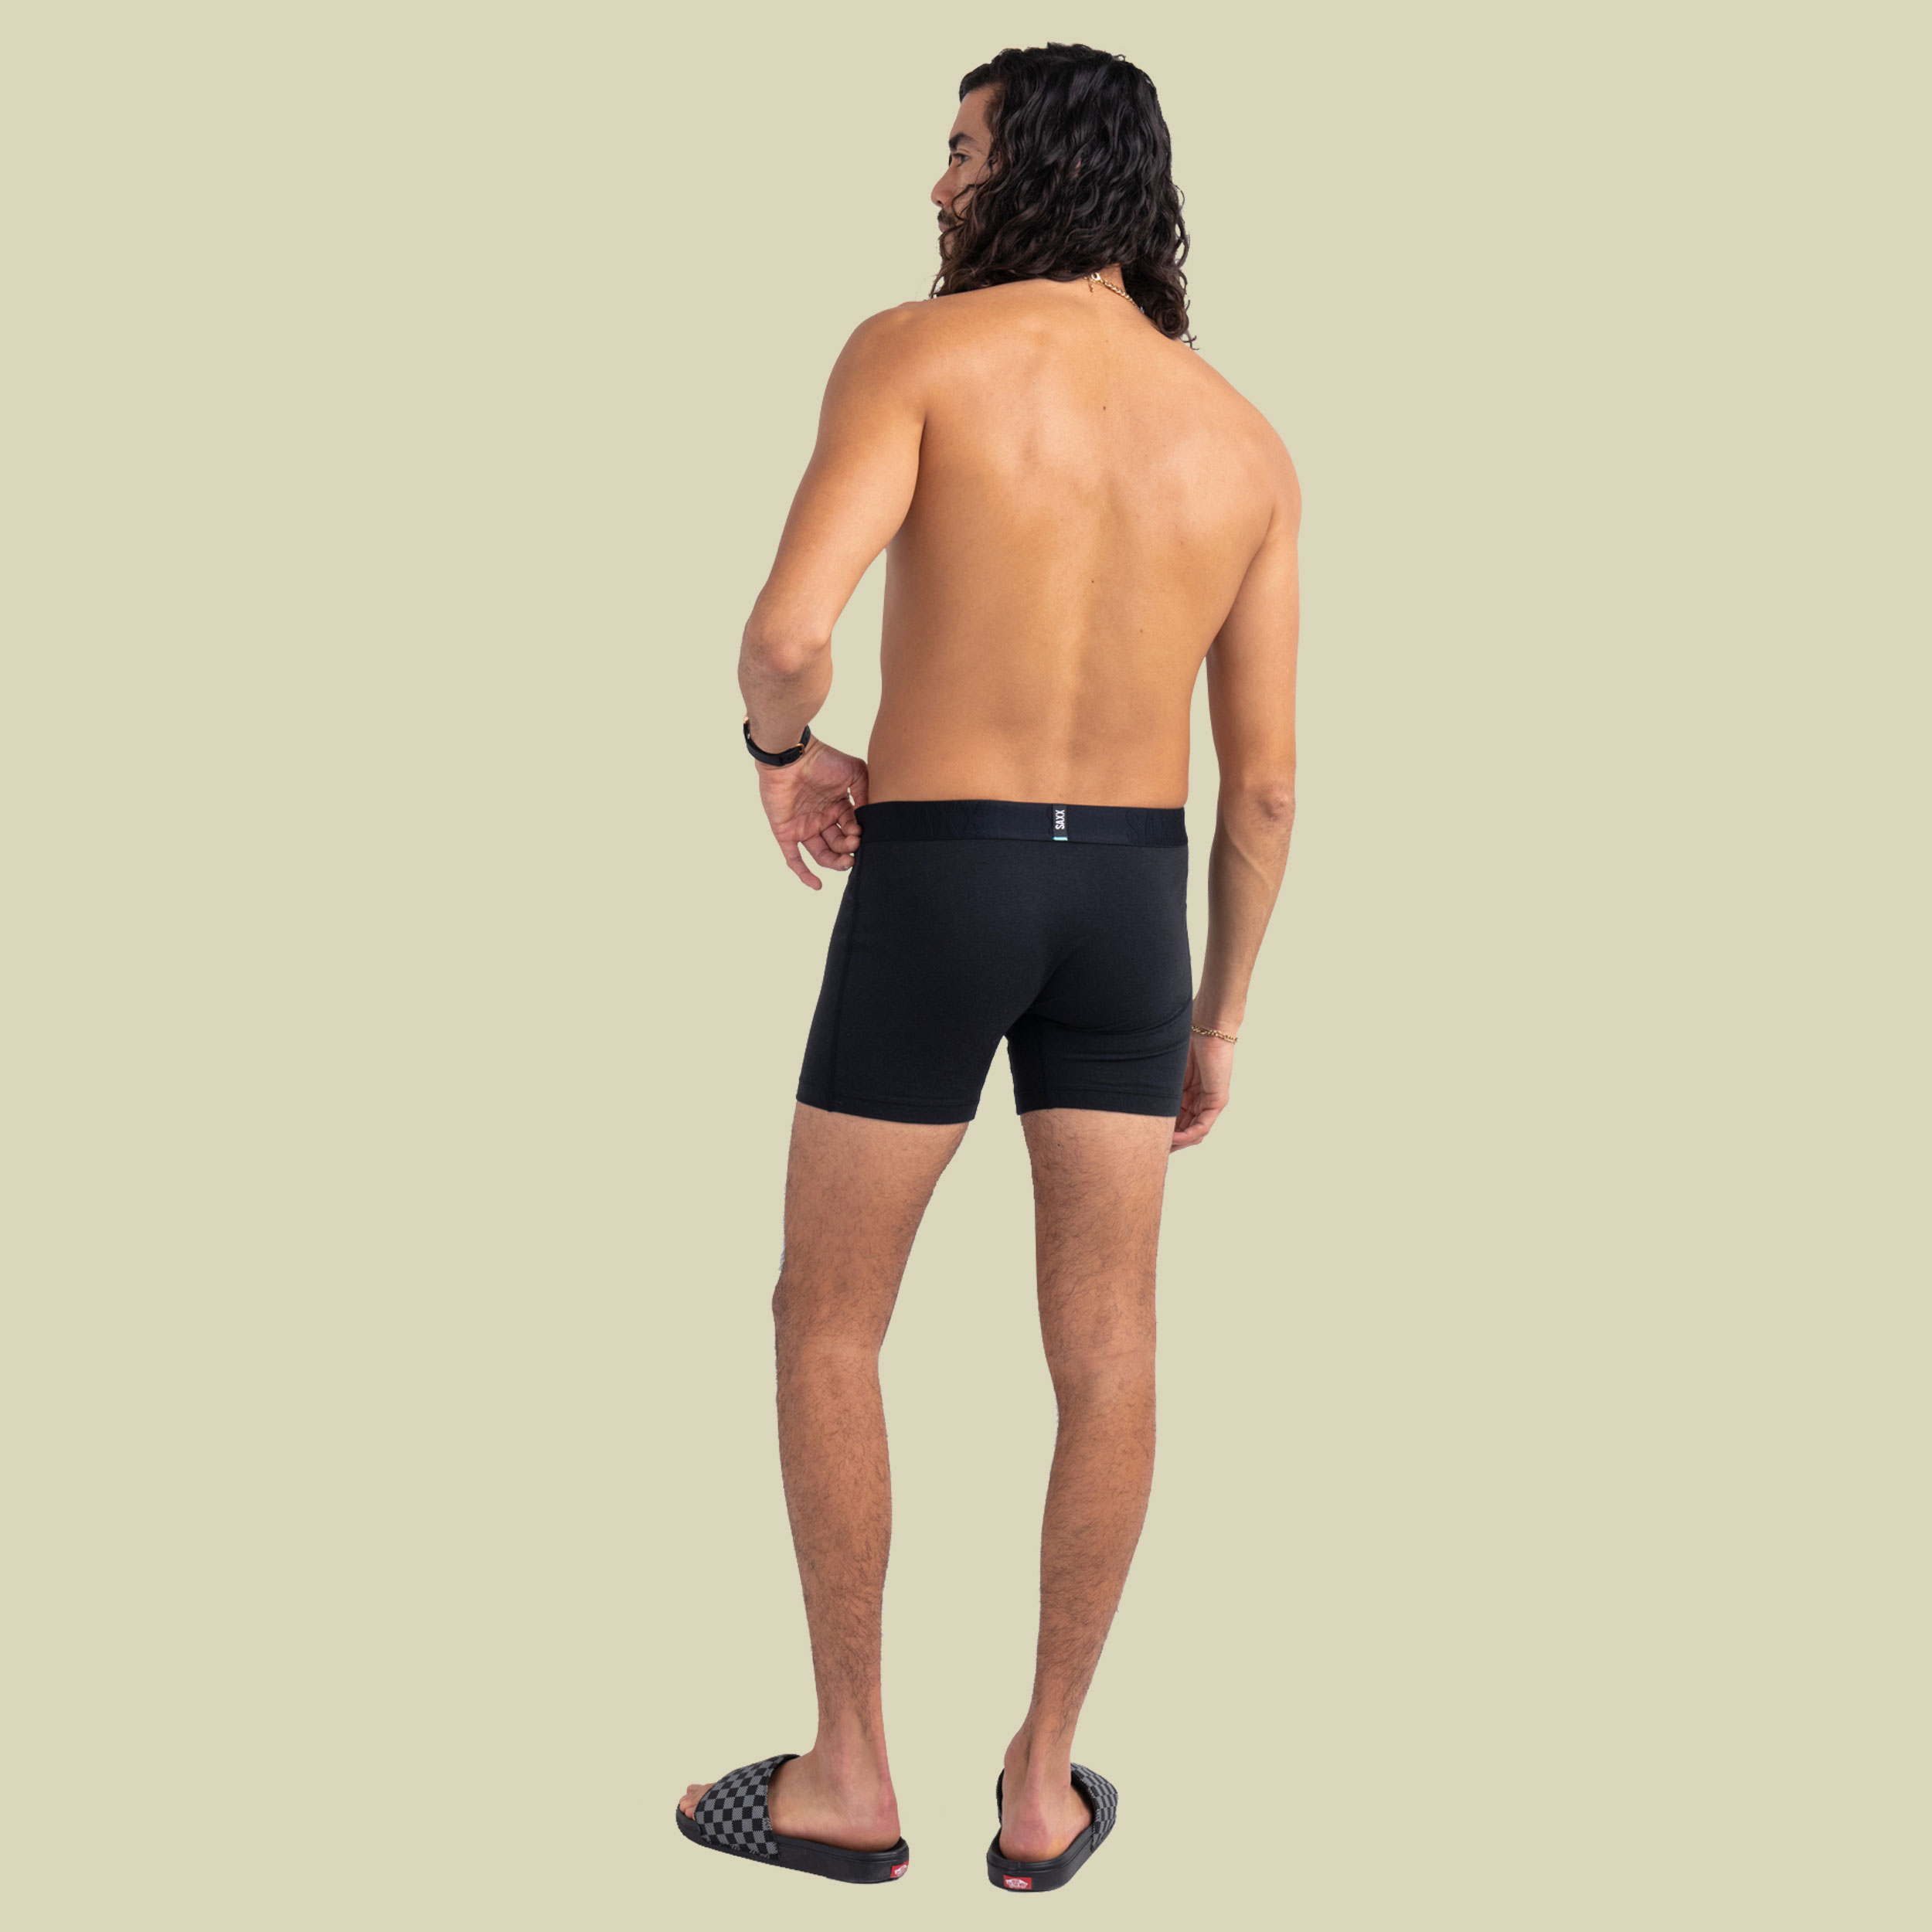 Droptemp Cooling Cotton Boxer Brief Fly 2pk S mehrfarbig - back & forth/black